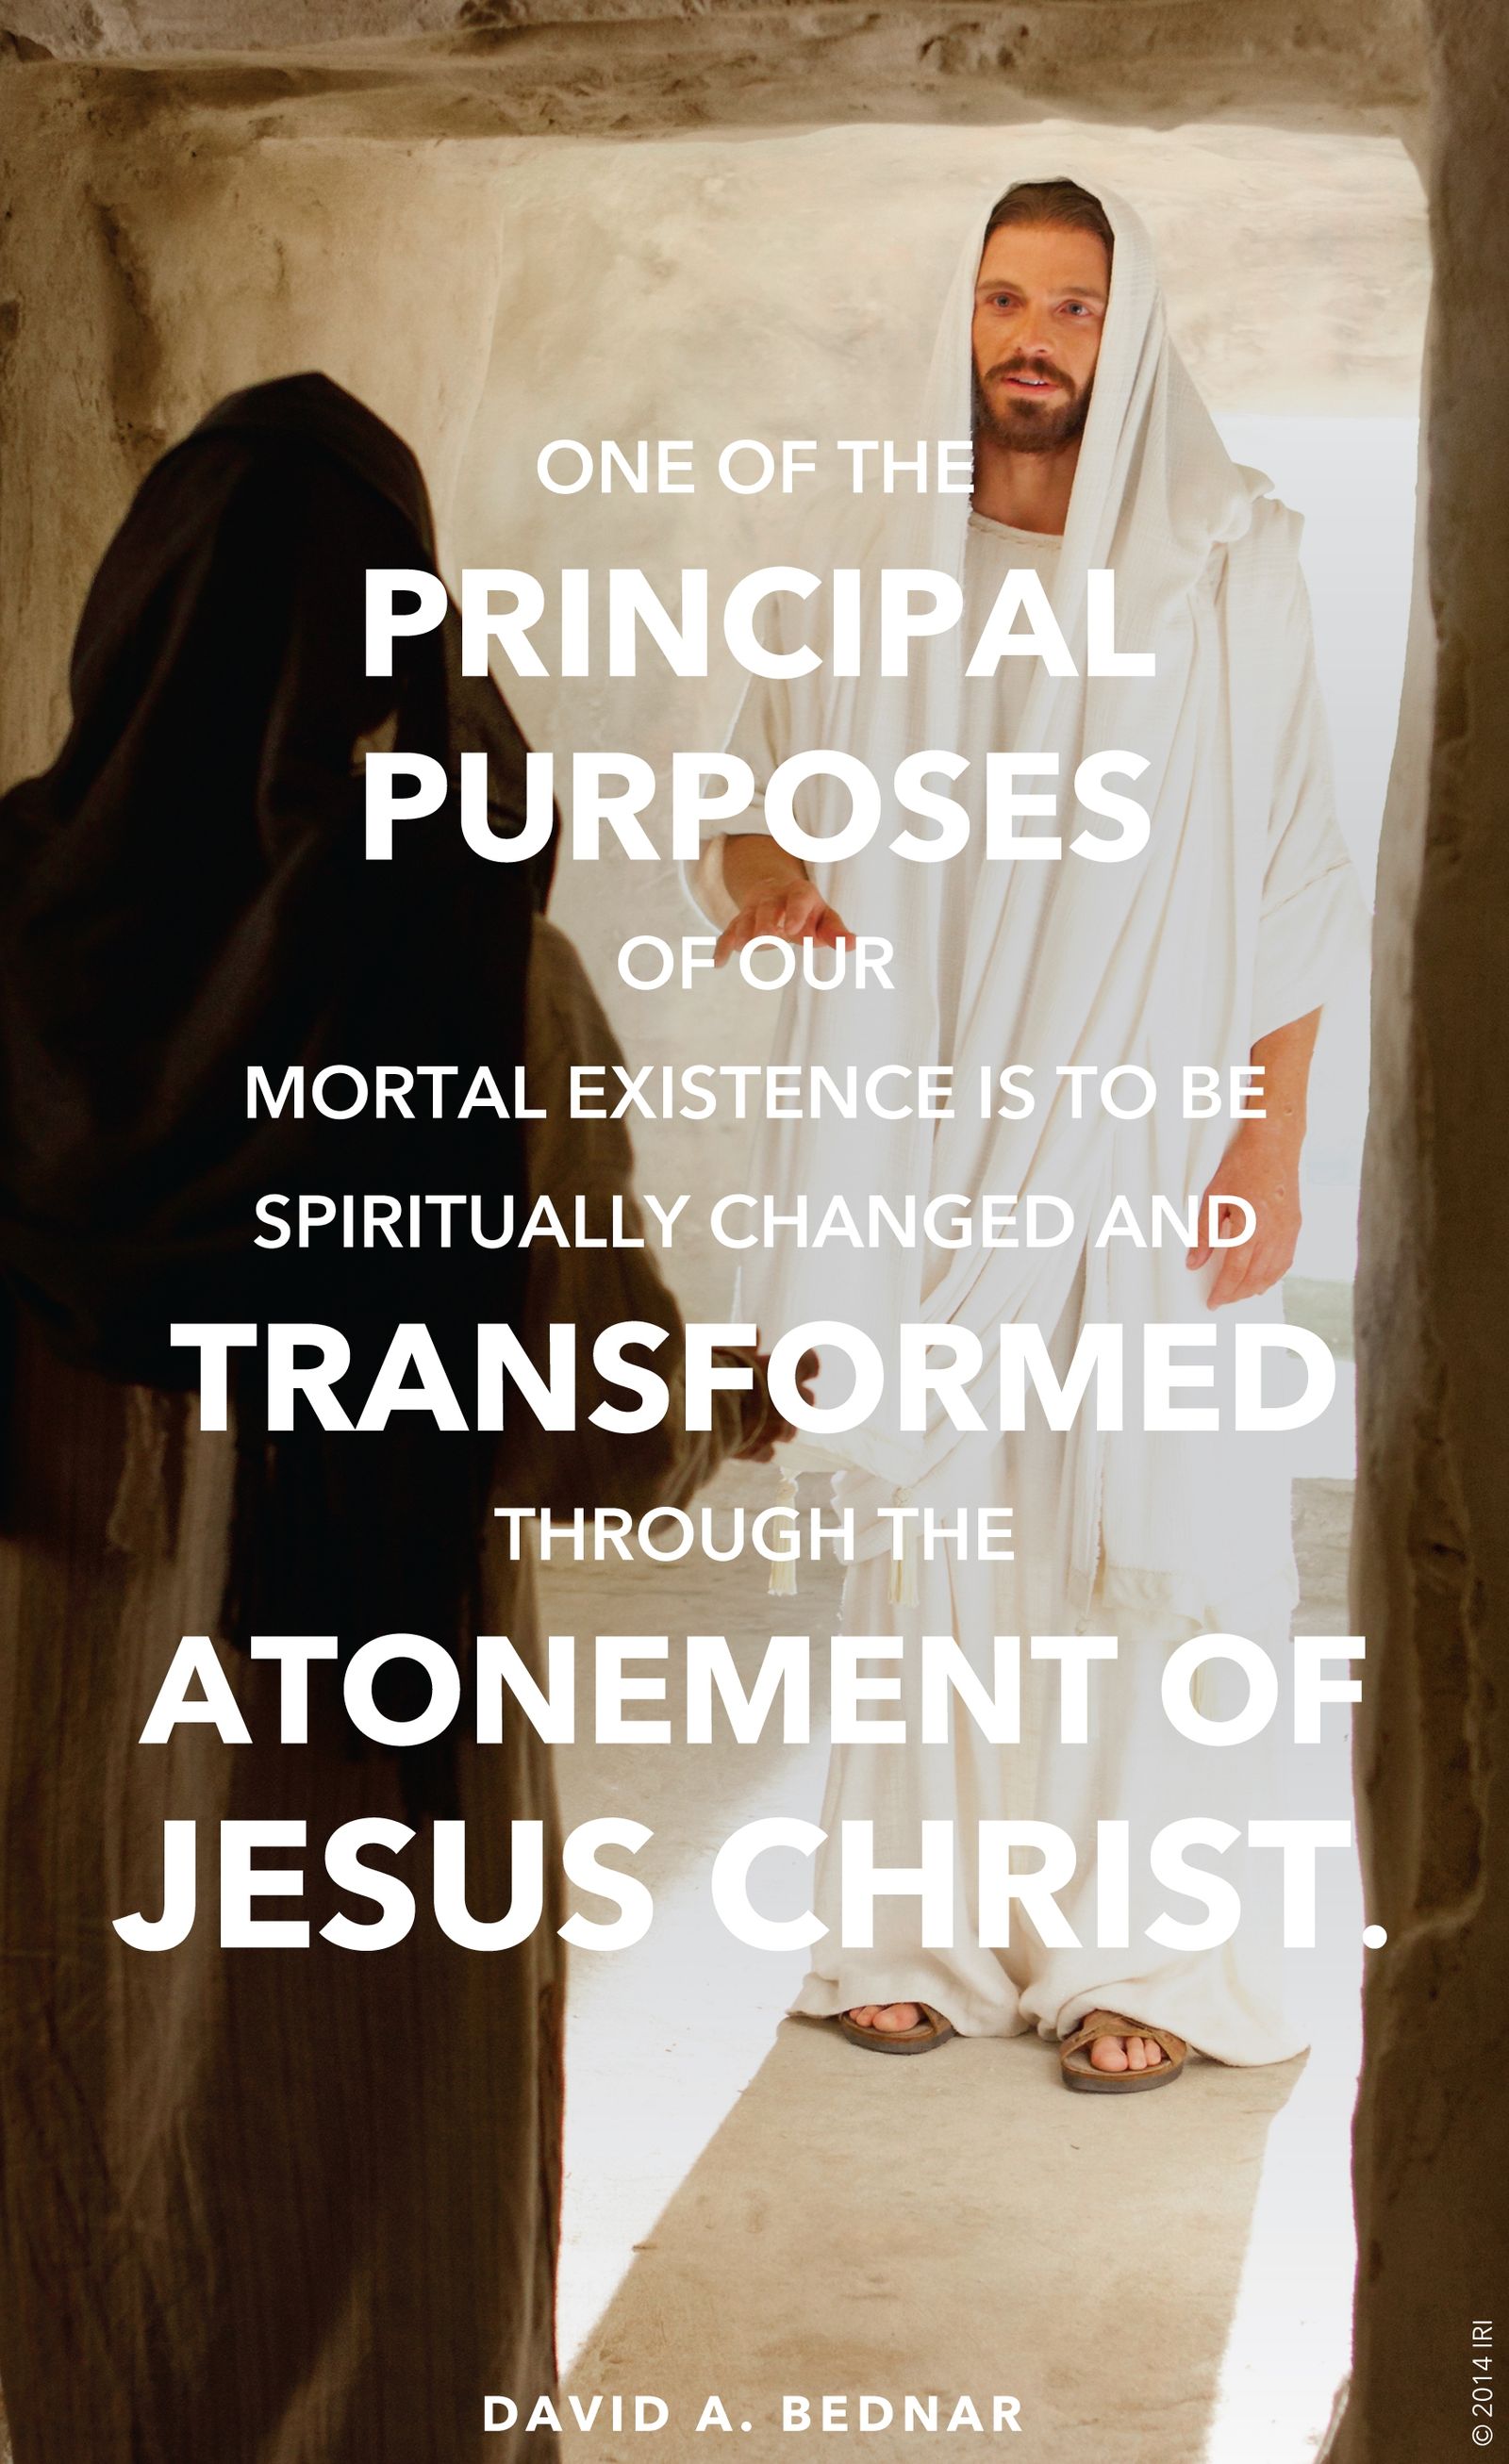 “One of the principal purposes of our mortal existence is to be spiritually changed and transformed through the Atonement of Jesus Christ.”—Elder David A. Bednar, “Ye Must Be Born Again”